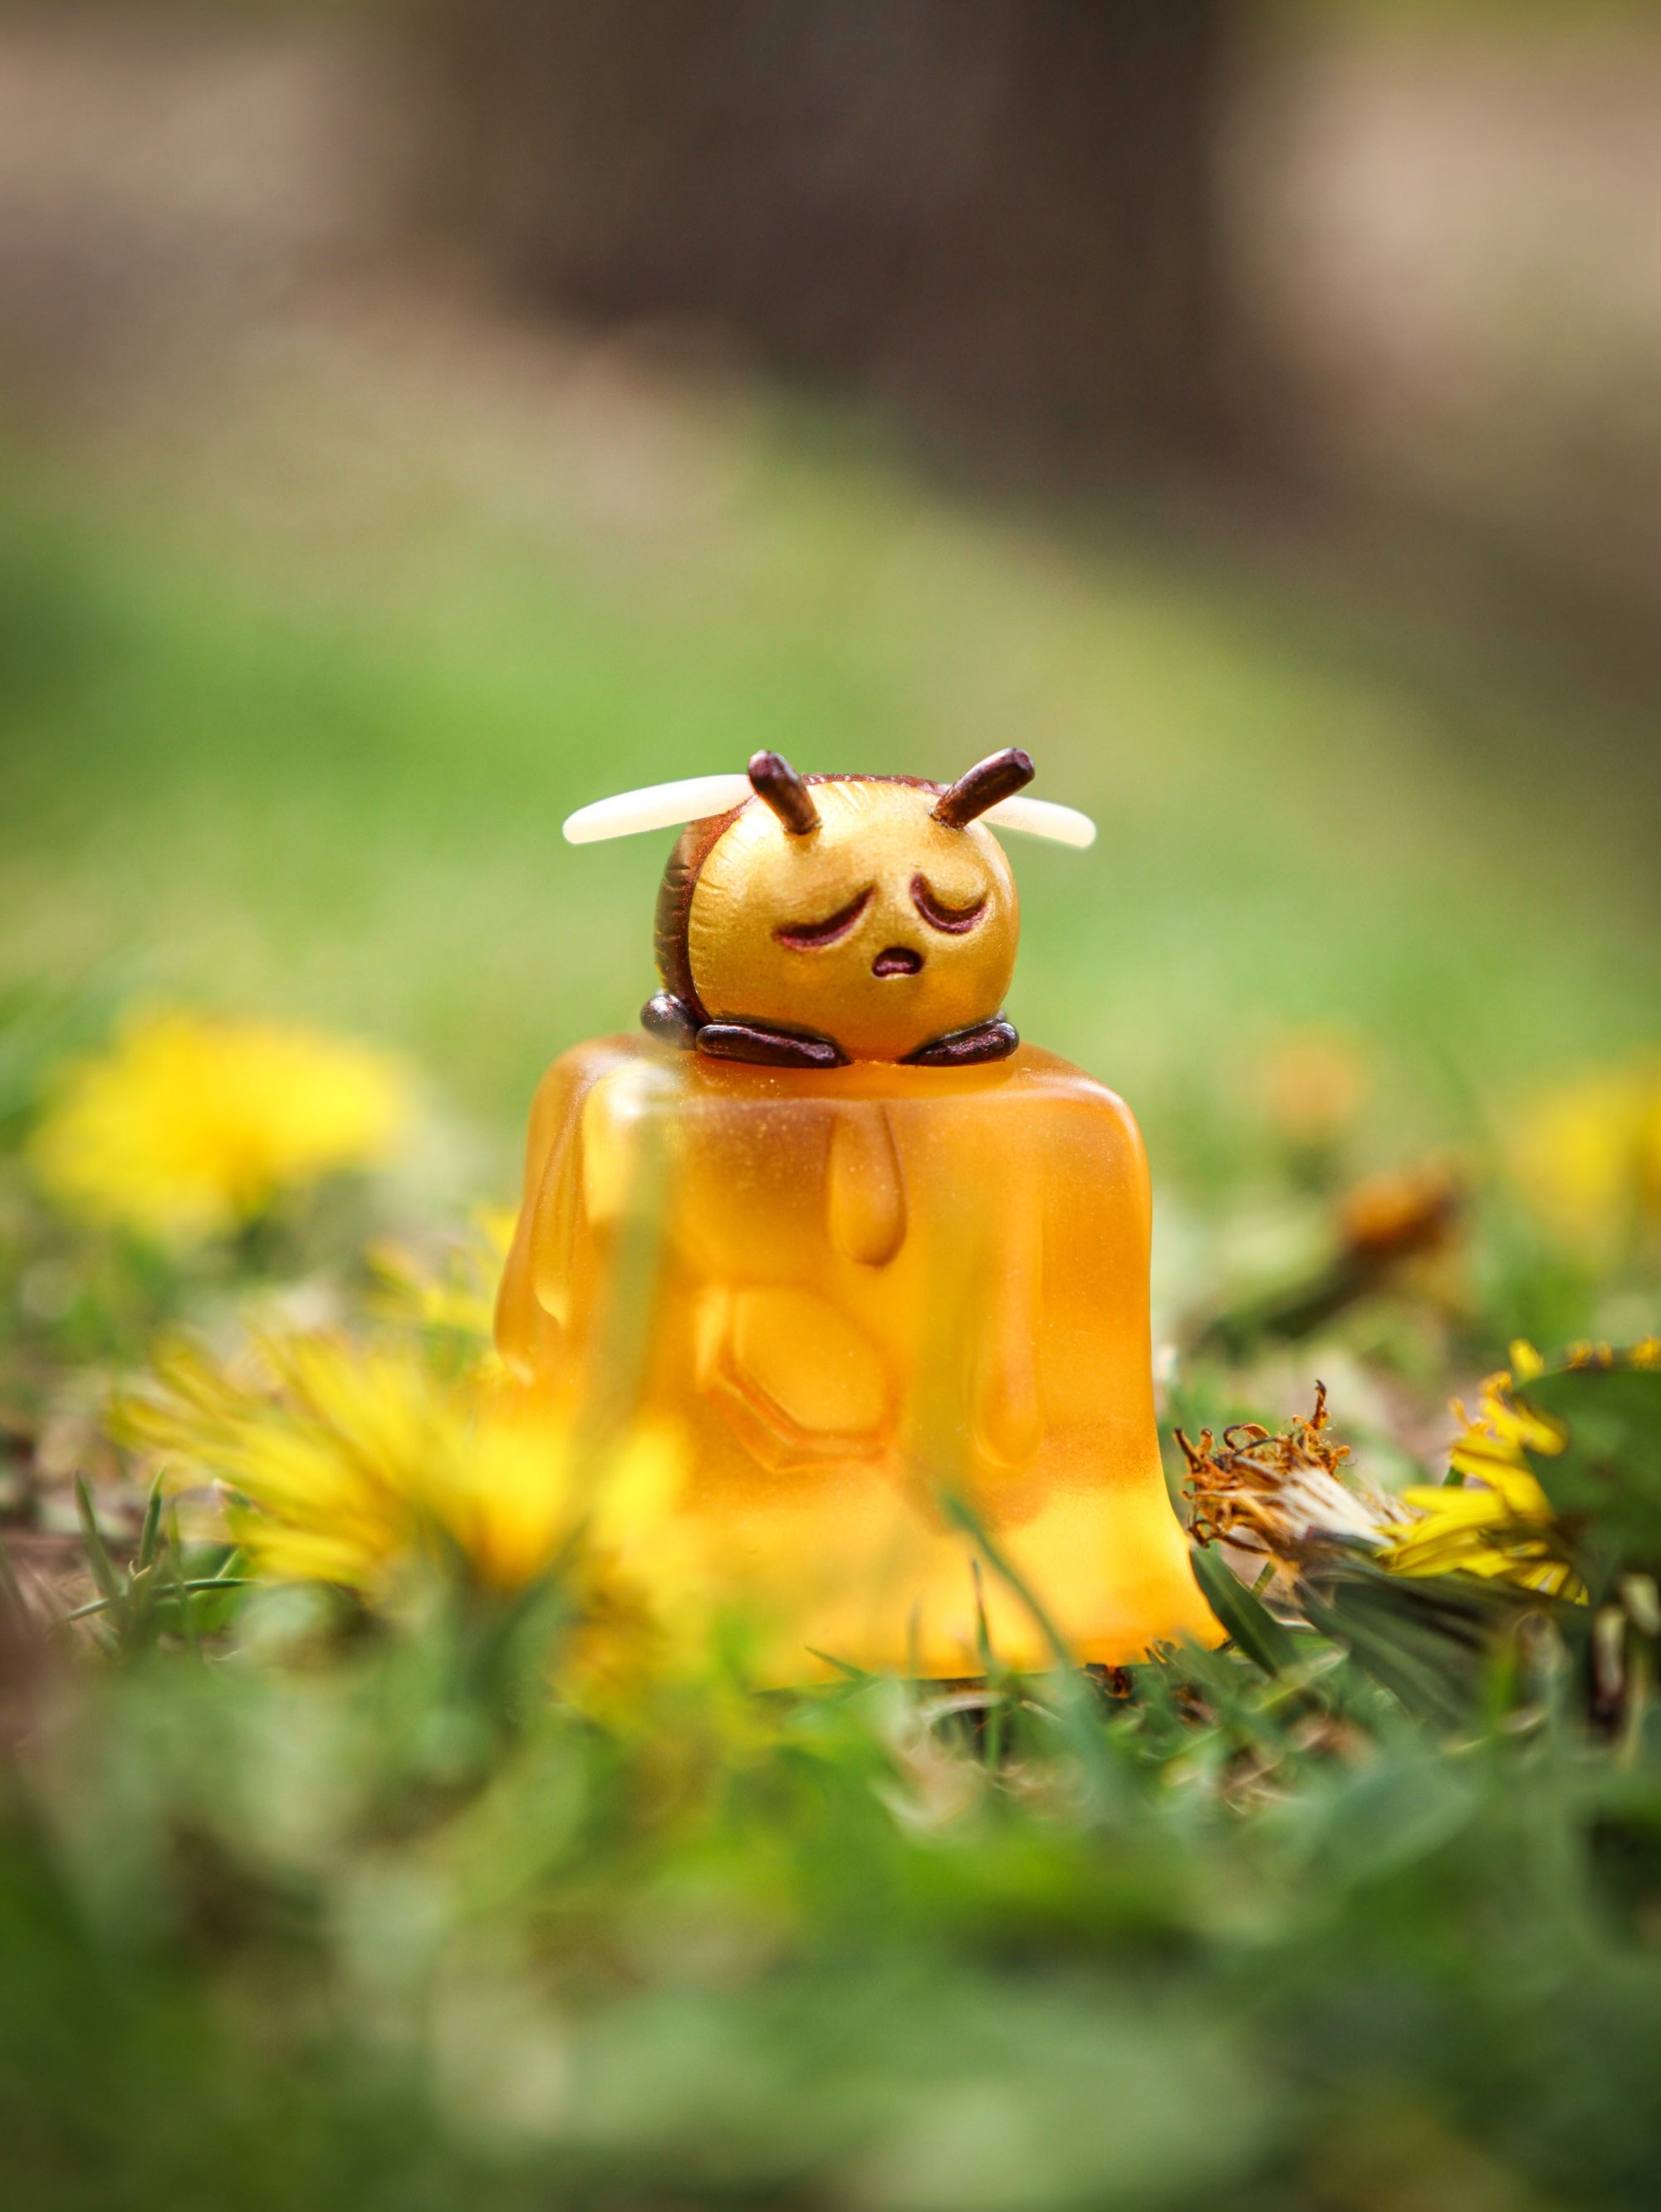 A yellow bee on a cube toy in grass, part of Little Shit Big Deal - CUBES by Fairies And Fancies. Sculpted by Dr. Polpz. A blind box and art toy store.